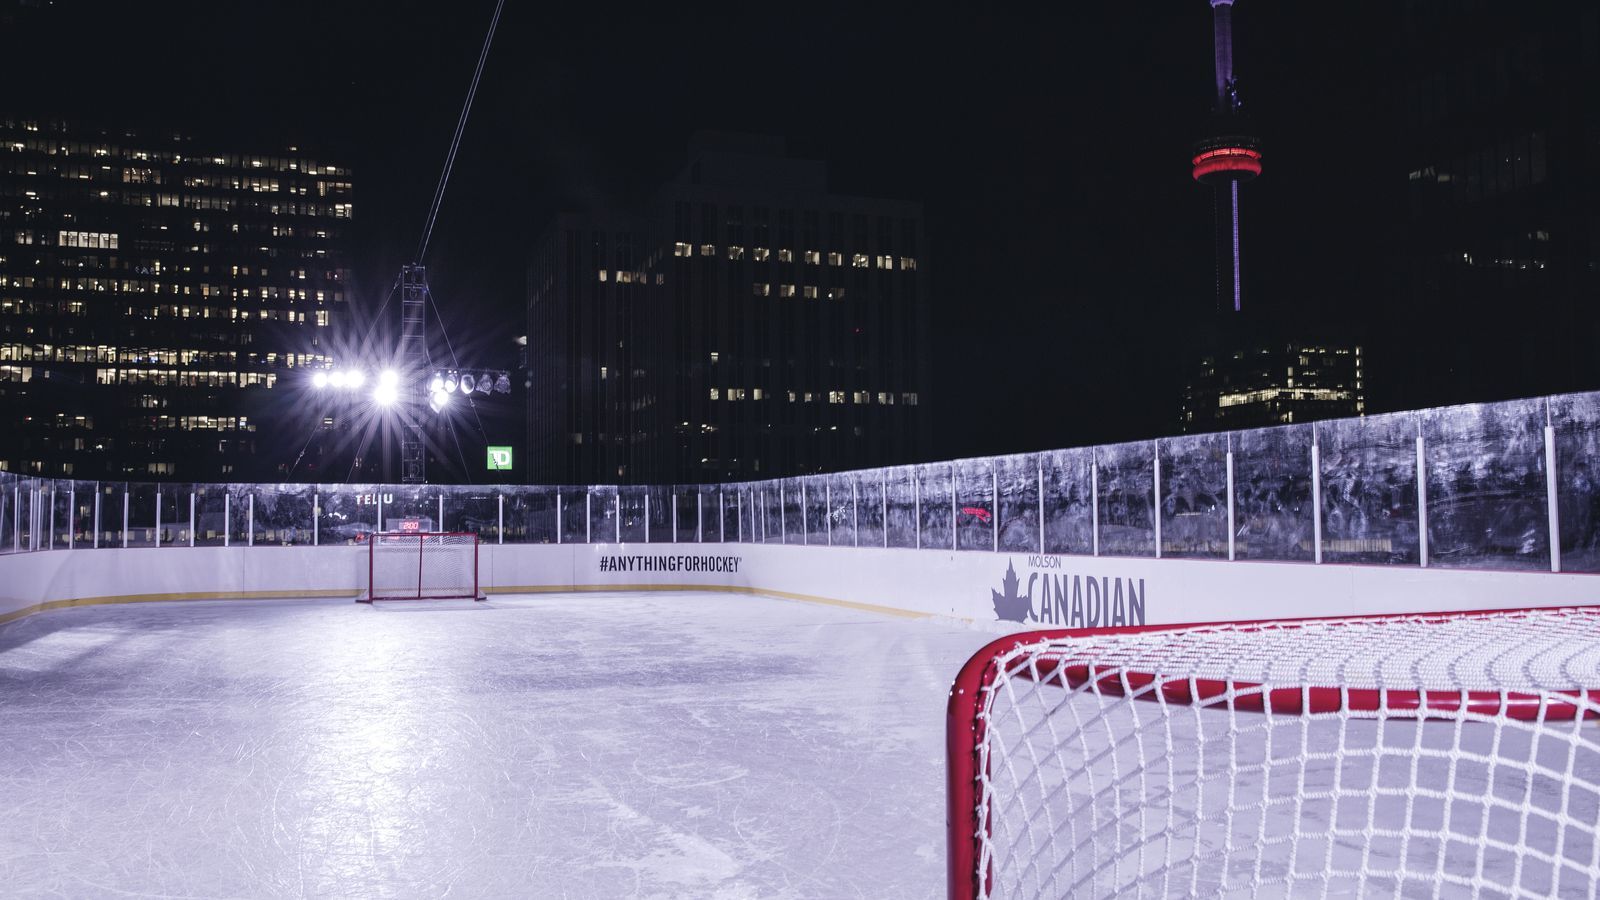 Hockey 30 stories high: My night at Molson Canadian's rooftop rink Plan Puppets